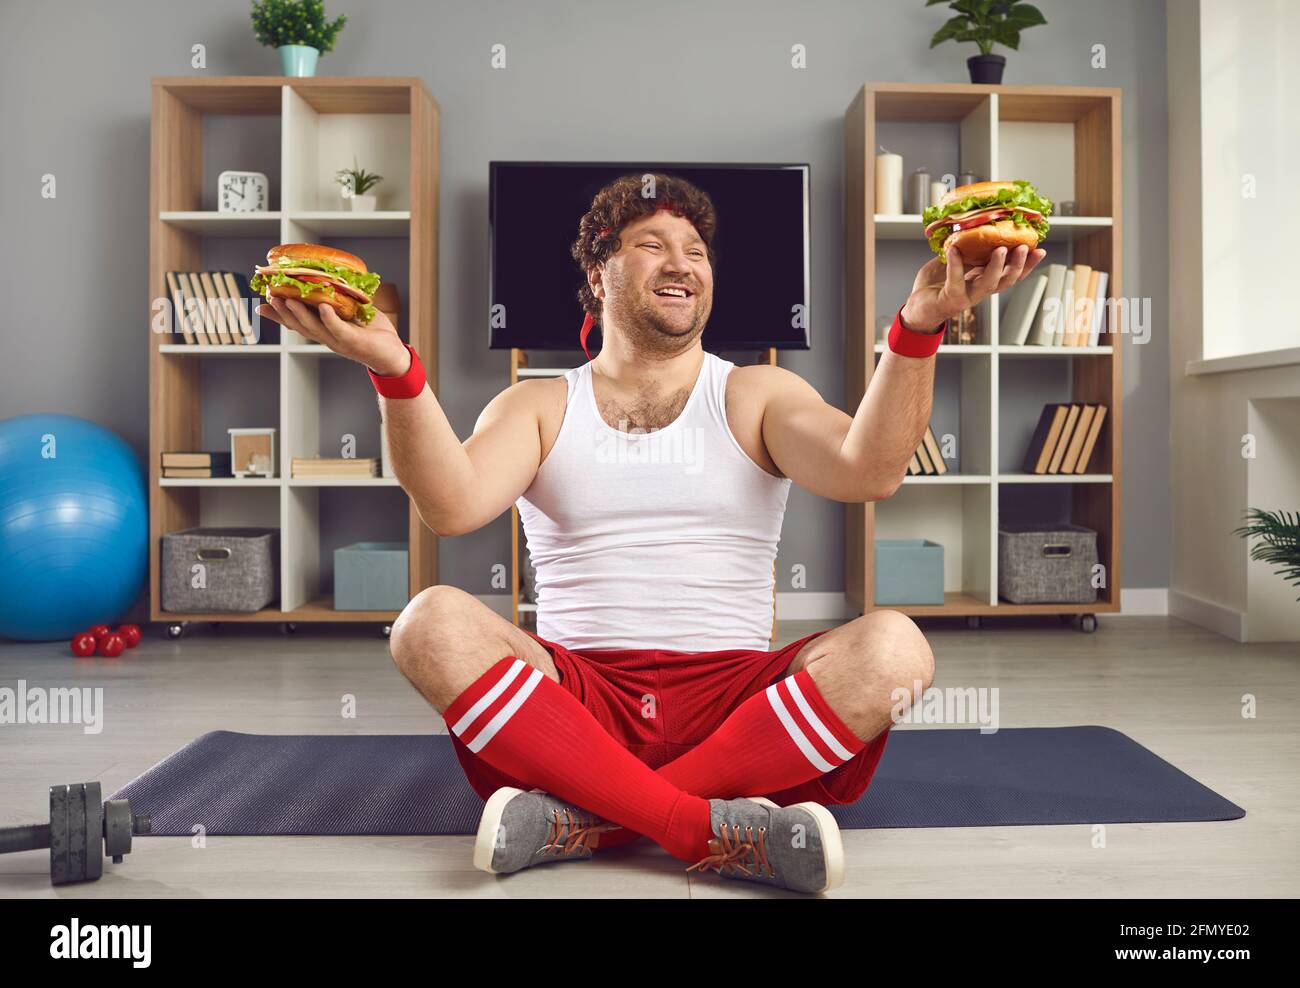 Excited millennial man with chubby body holding fast food burger in two hands Stock Photo